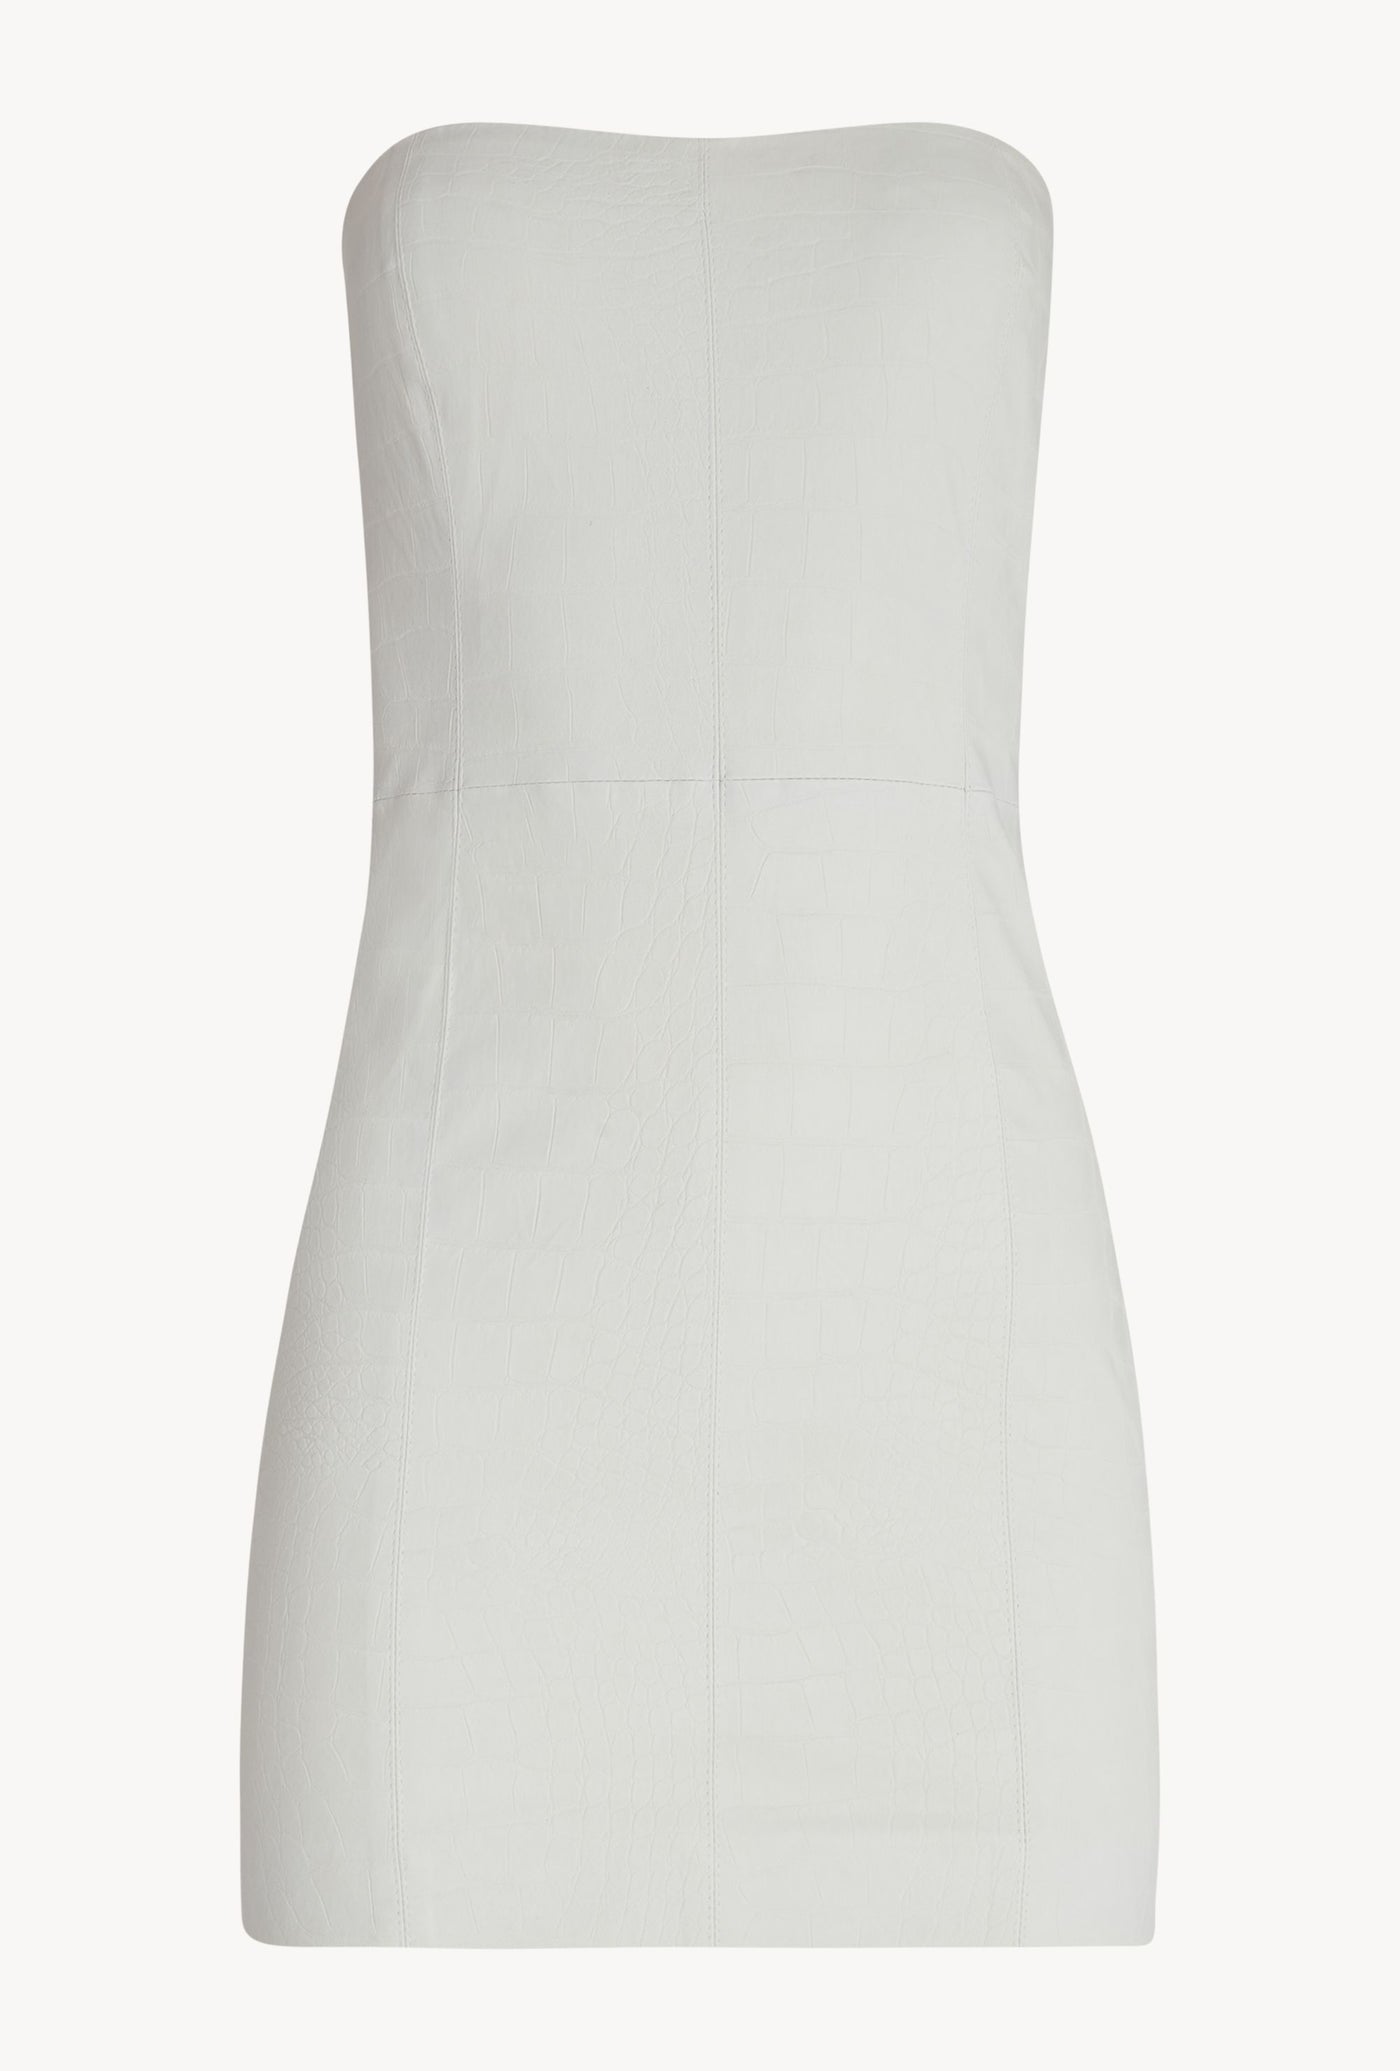 White Croc Embossed Leather Strapless Dress